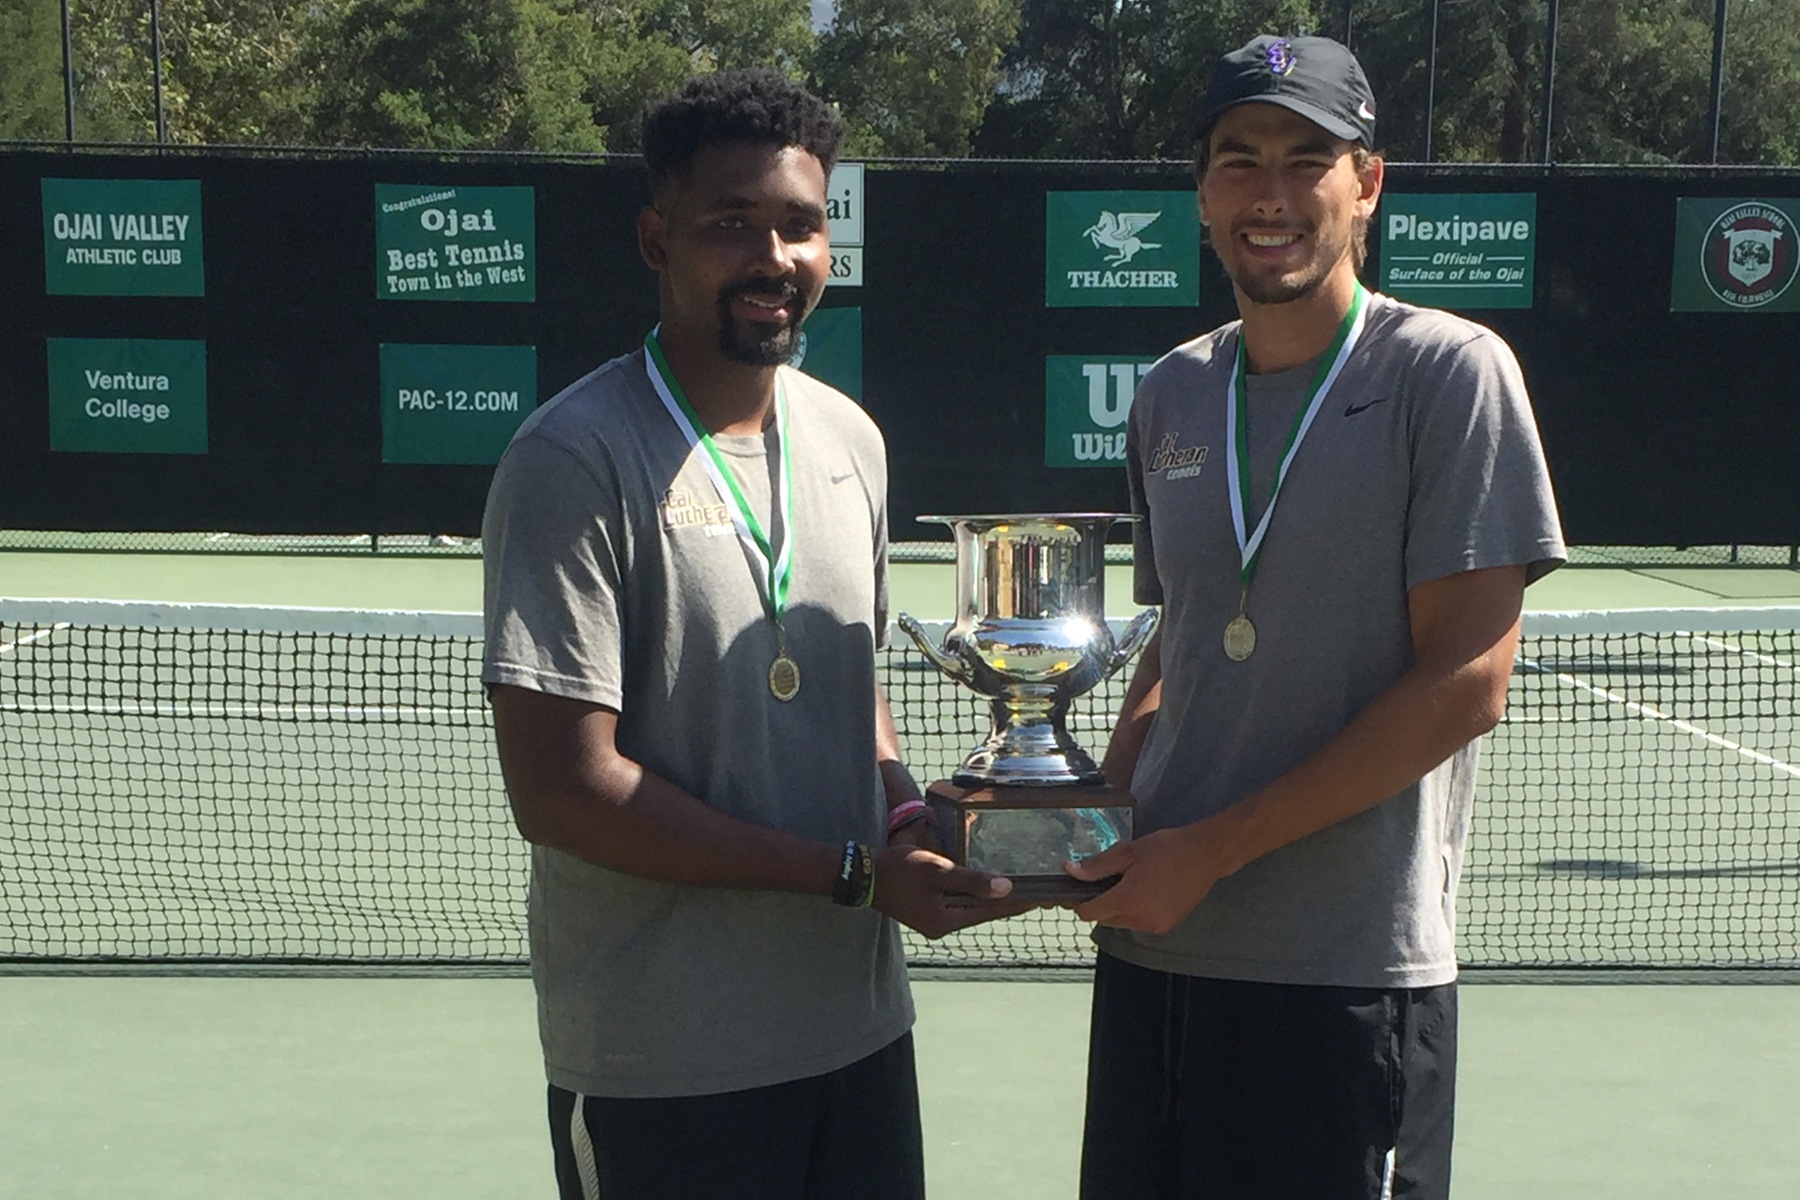 Joshua Legardy and Ransom Braaten claim the Independent College Doubles title at the Ojai Annual Tournament